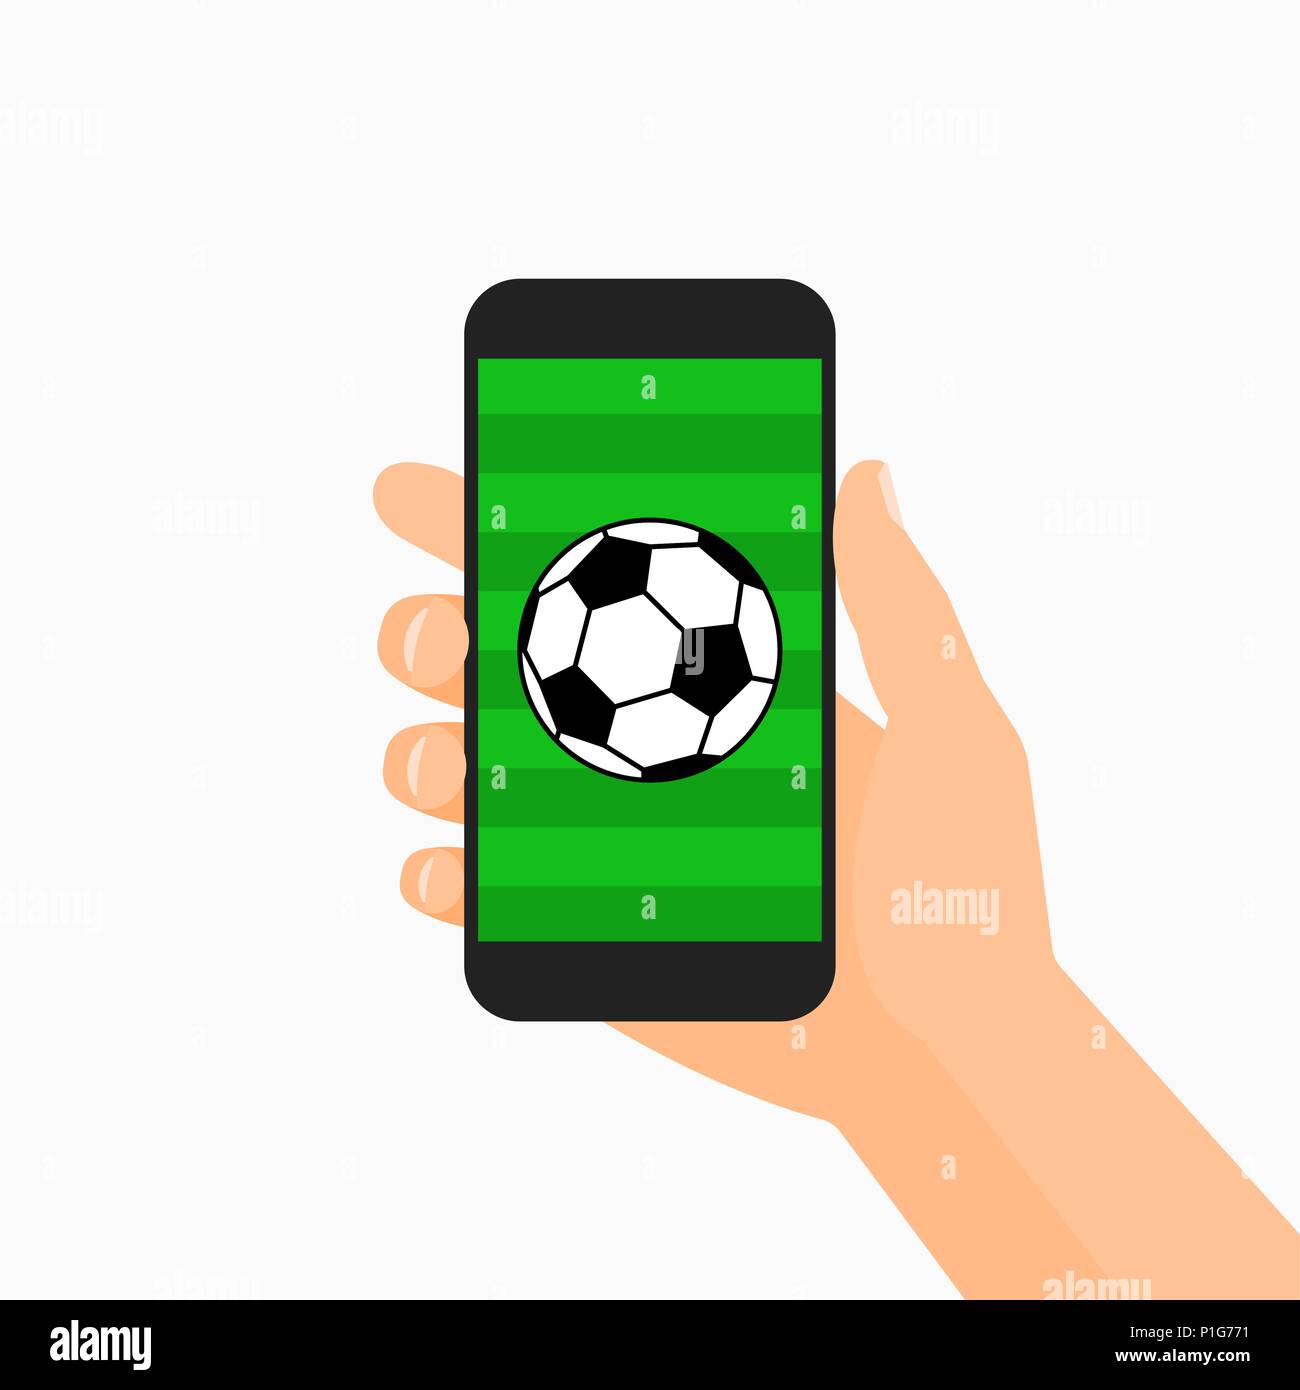 Hand holding smartphone displaying a black and white soccer ball on a green grass field Stock Vector